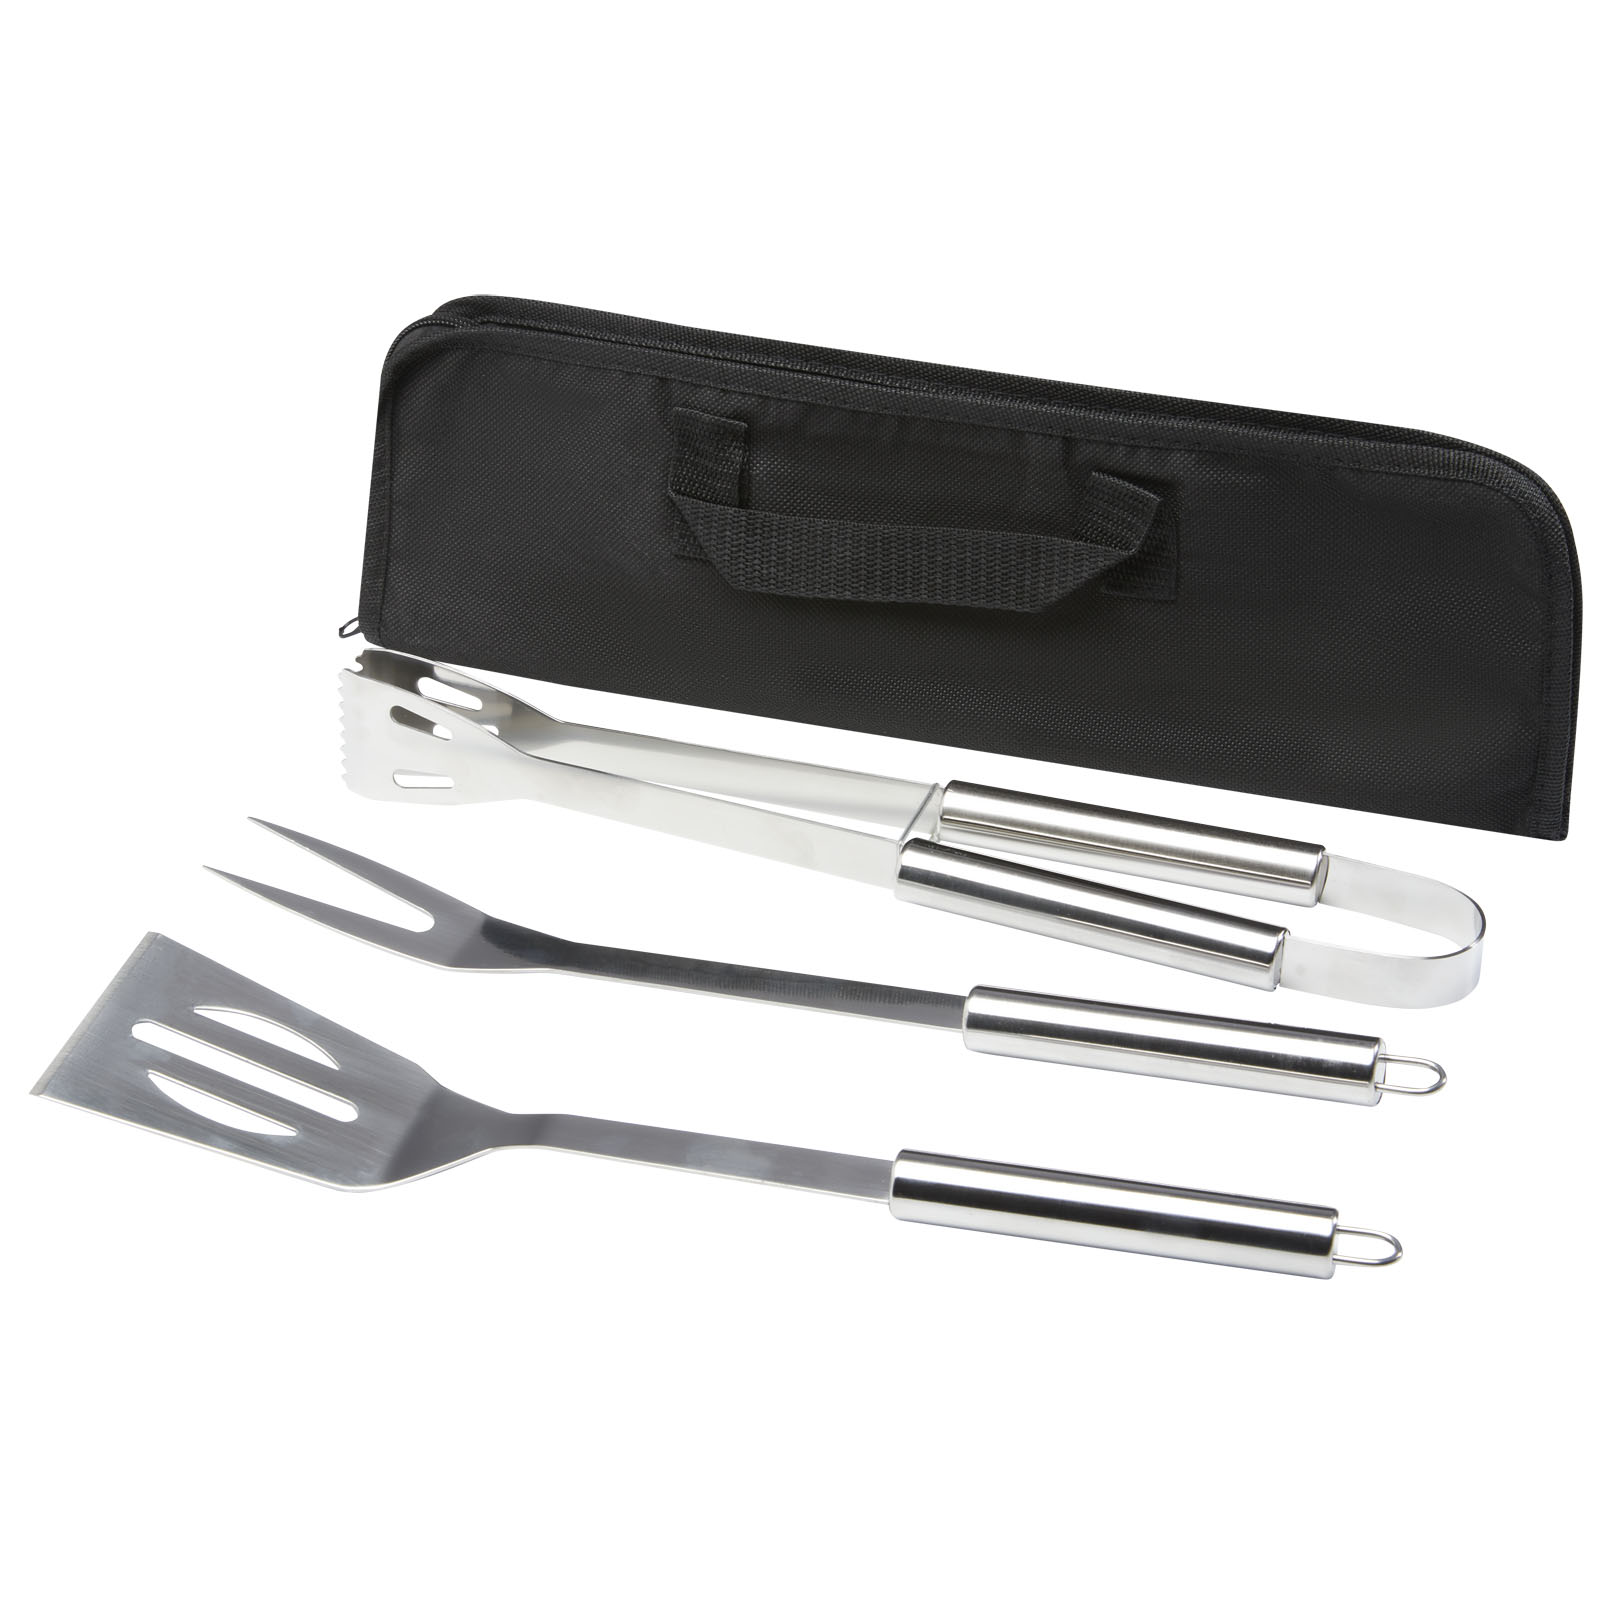 3-Piece BBQ Tool Set with Carrying Case - Childswickham